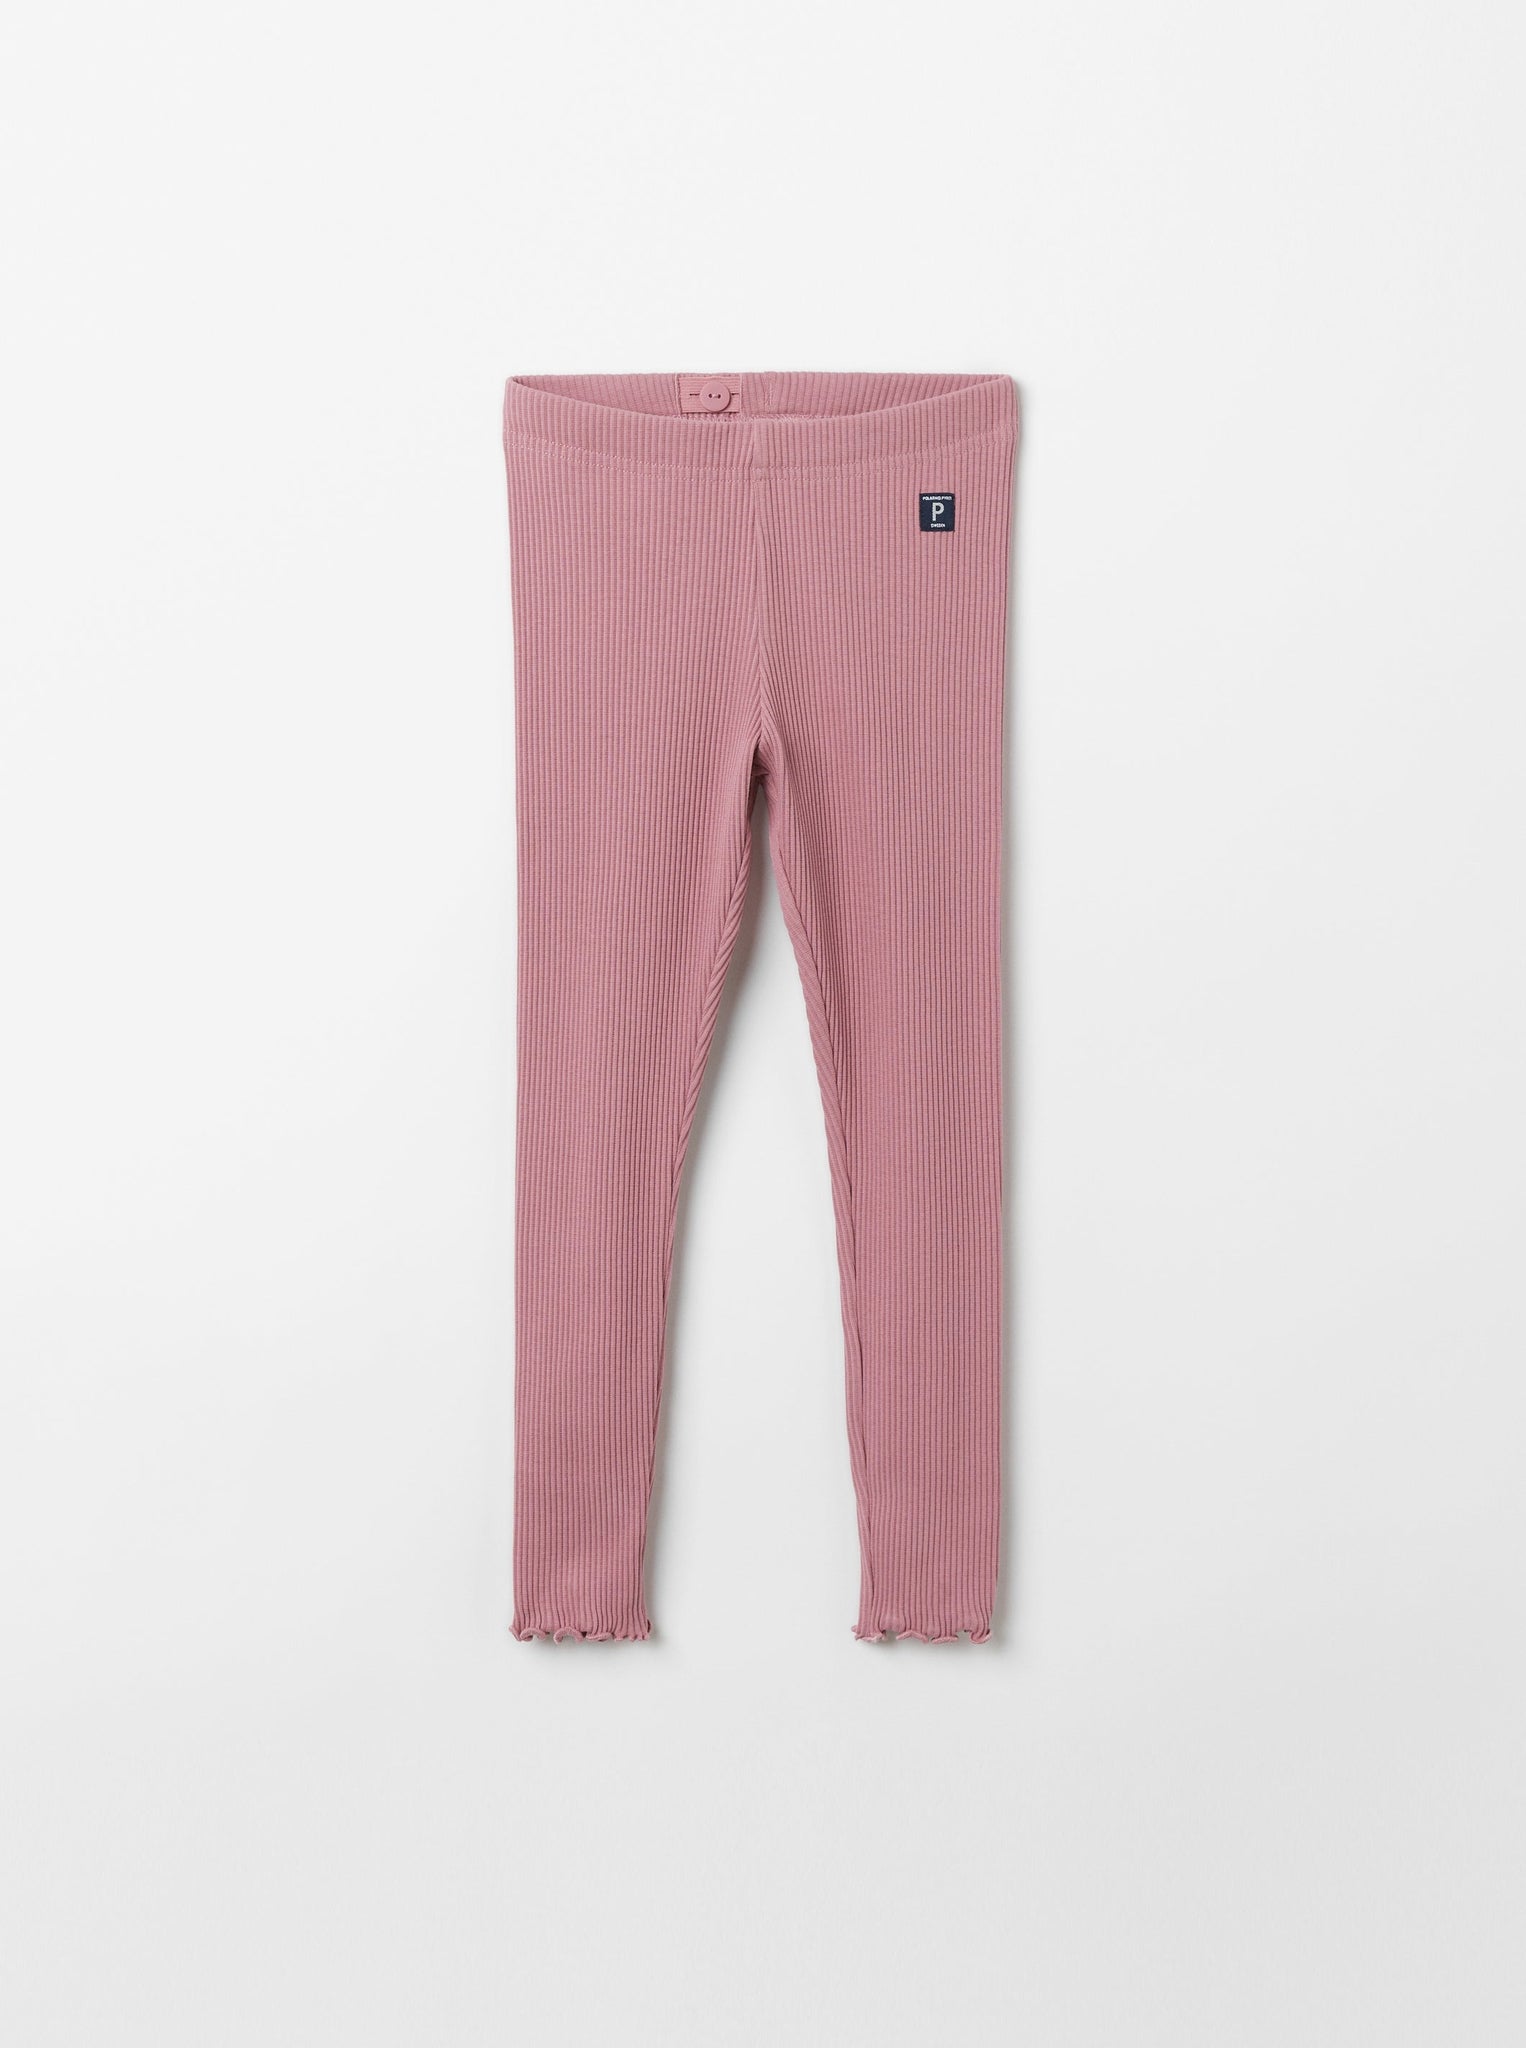 Organic Cotton Pink Kids Leggings from the Polarn O. Pyret kidswear collection. Clothes made using sustainably sourced materials.